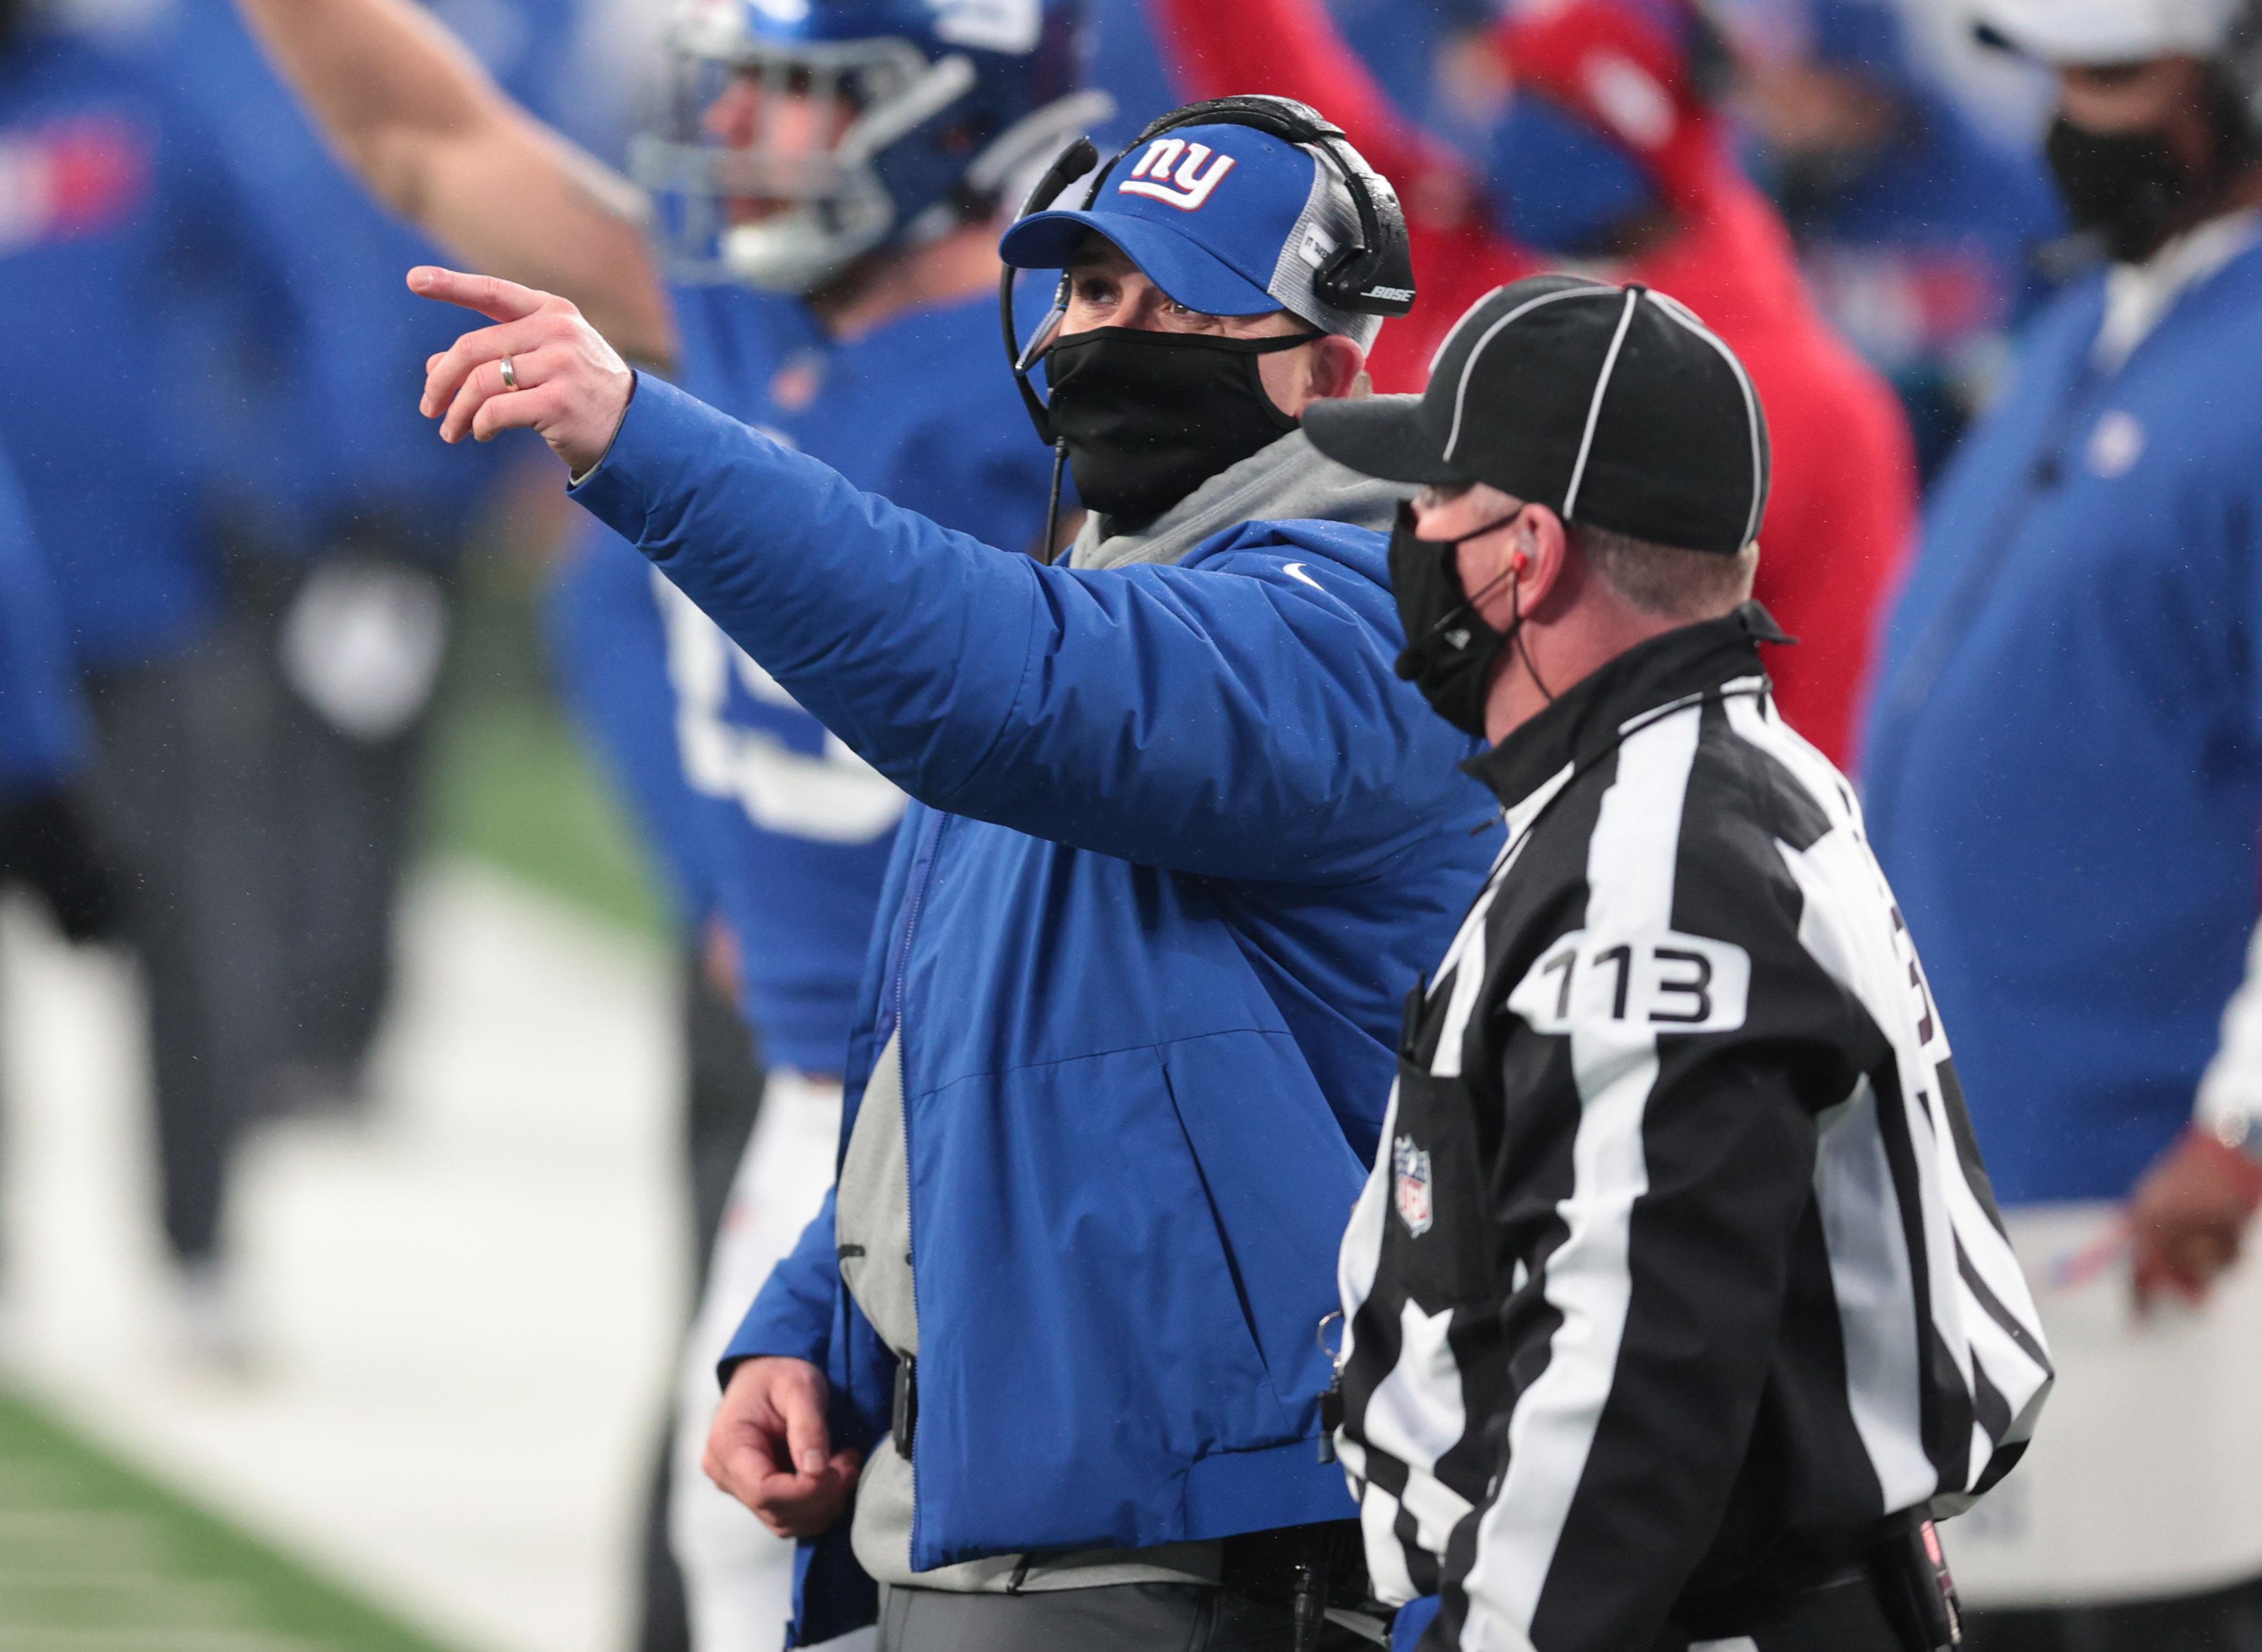 Jan 3, 2021; East Rutherford, NJ, USA; New York Giants head coach Joe Judge talks with an official against the Dallas Cowboys in the second half at MetLife Stadium. Mandatory Credit: Vincent Carchietta-USA TODAY Sports / © Vincent Carchietta-USA TODAY Sports